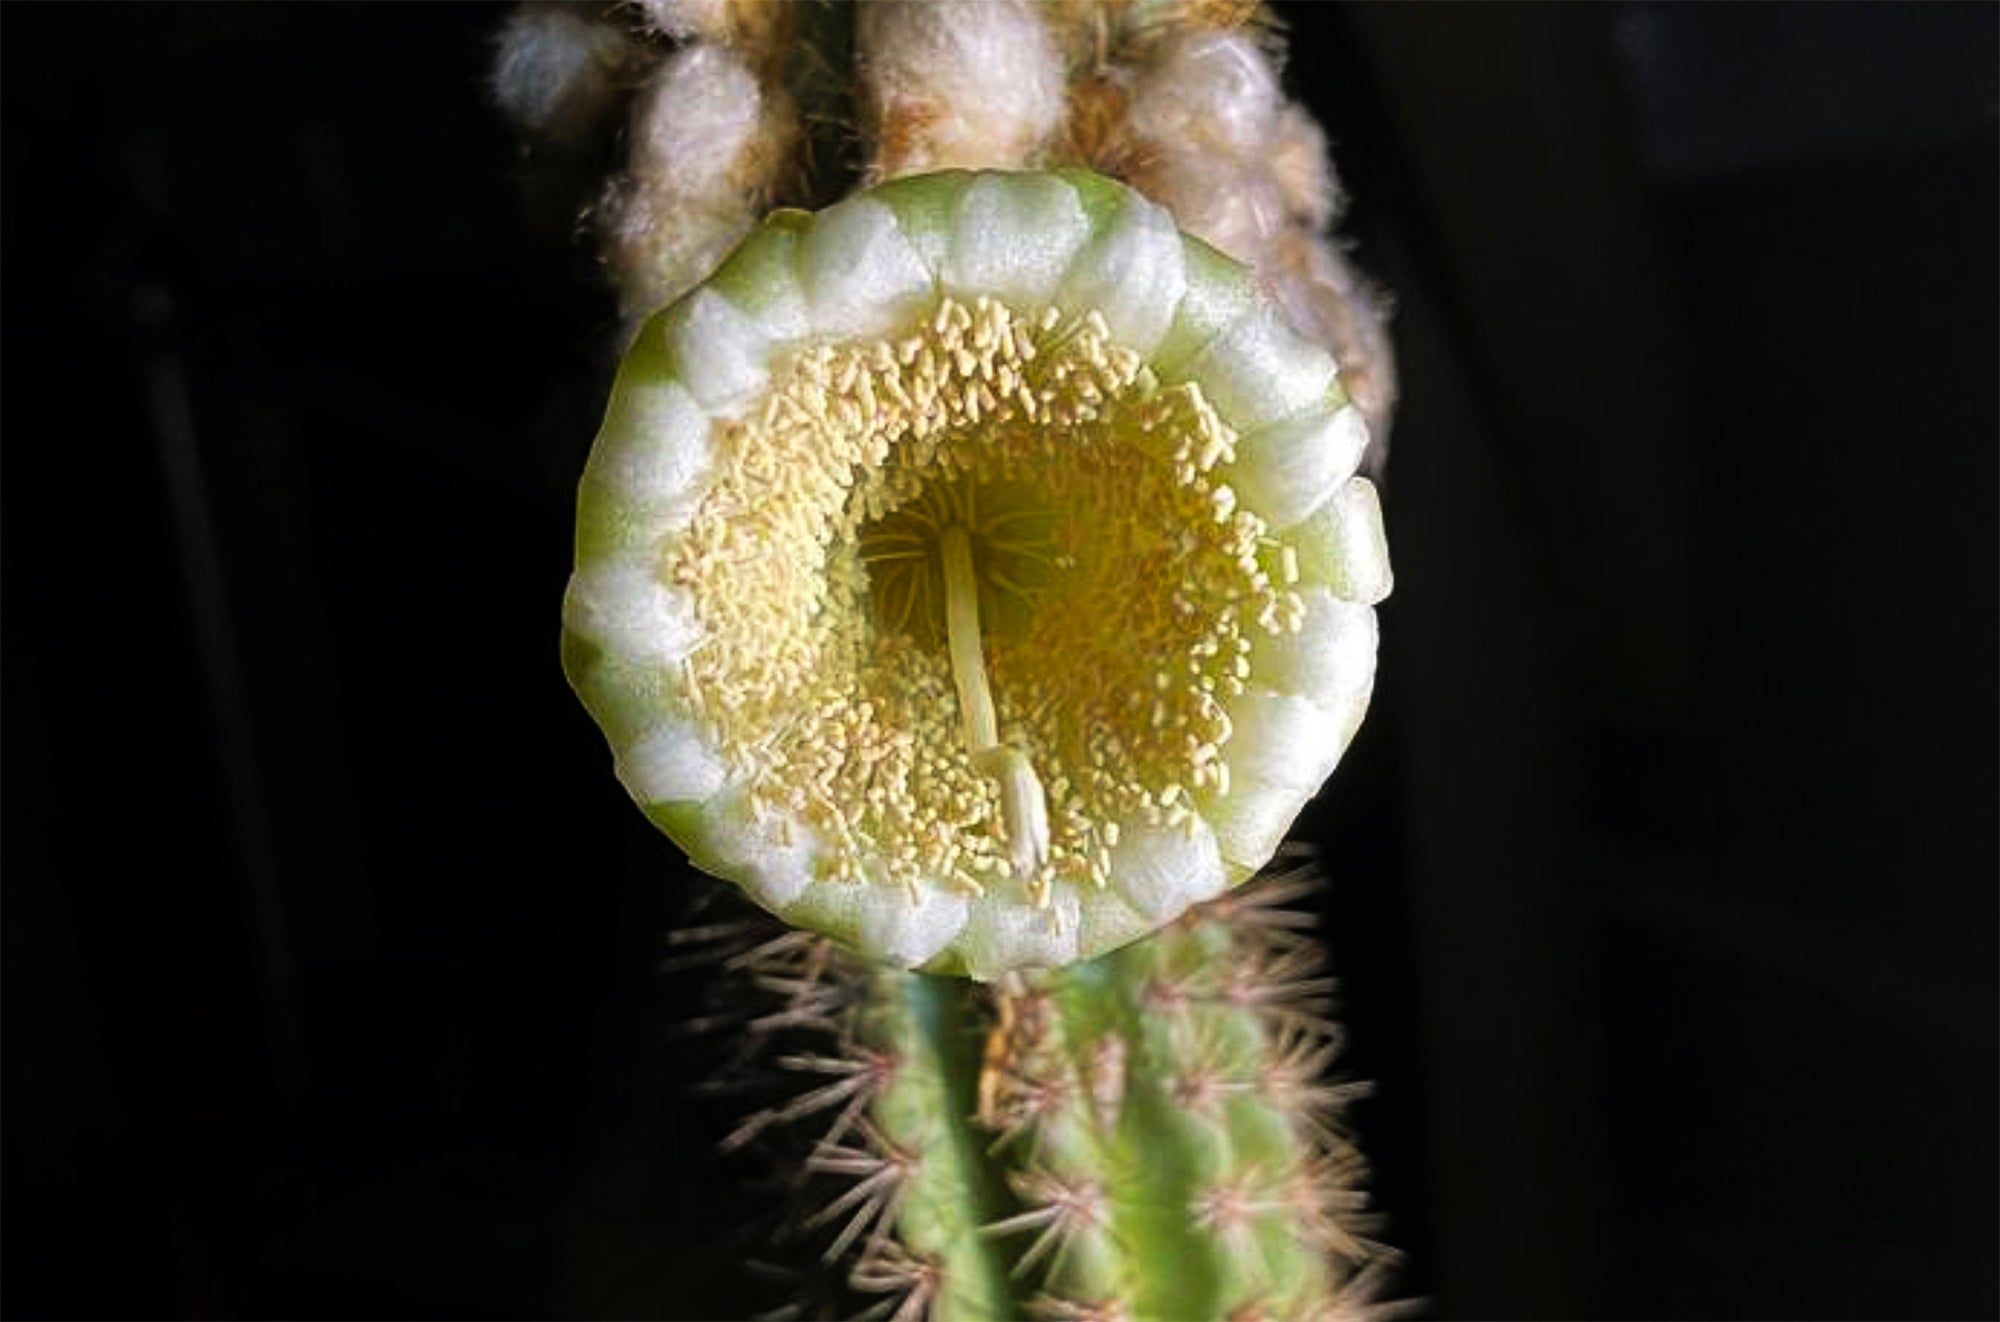 A yellow and white flower on a cactus.